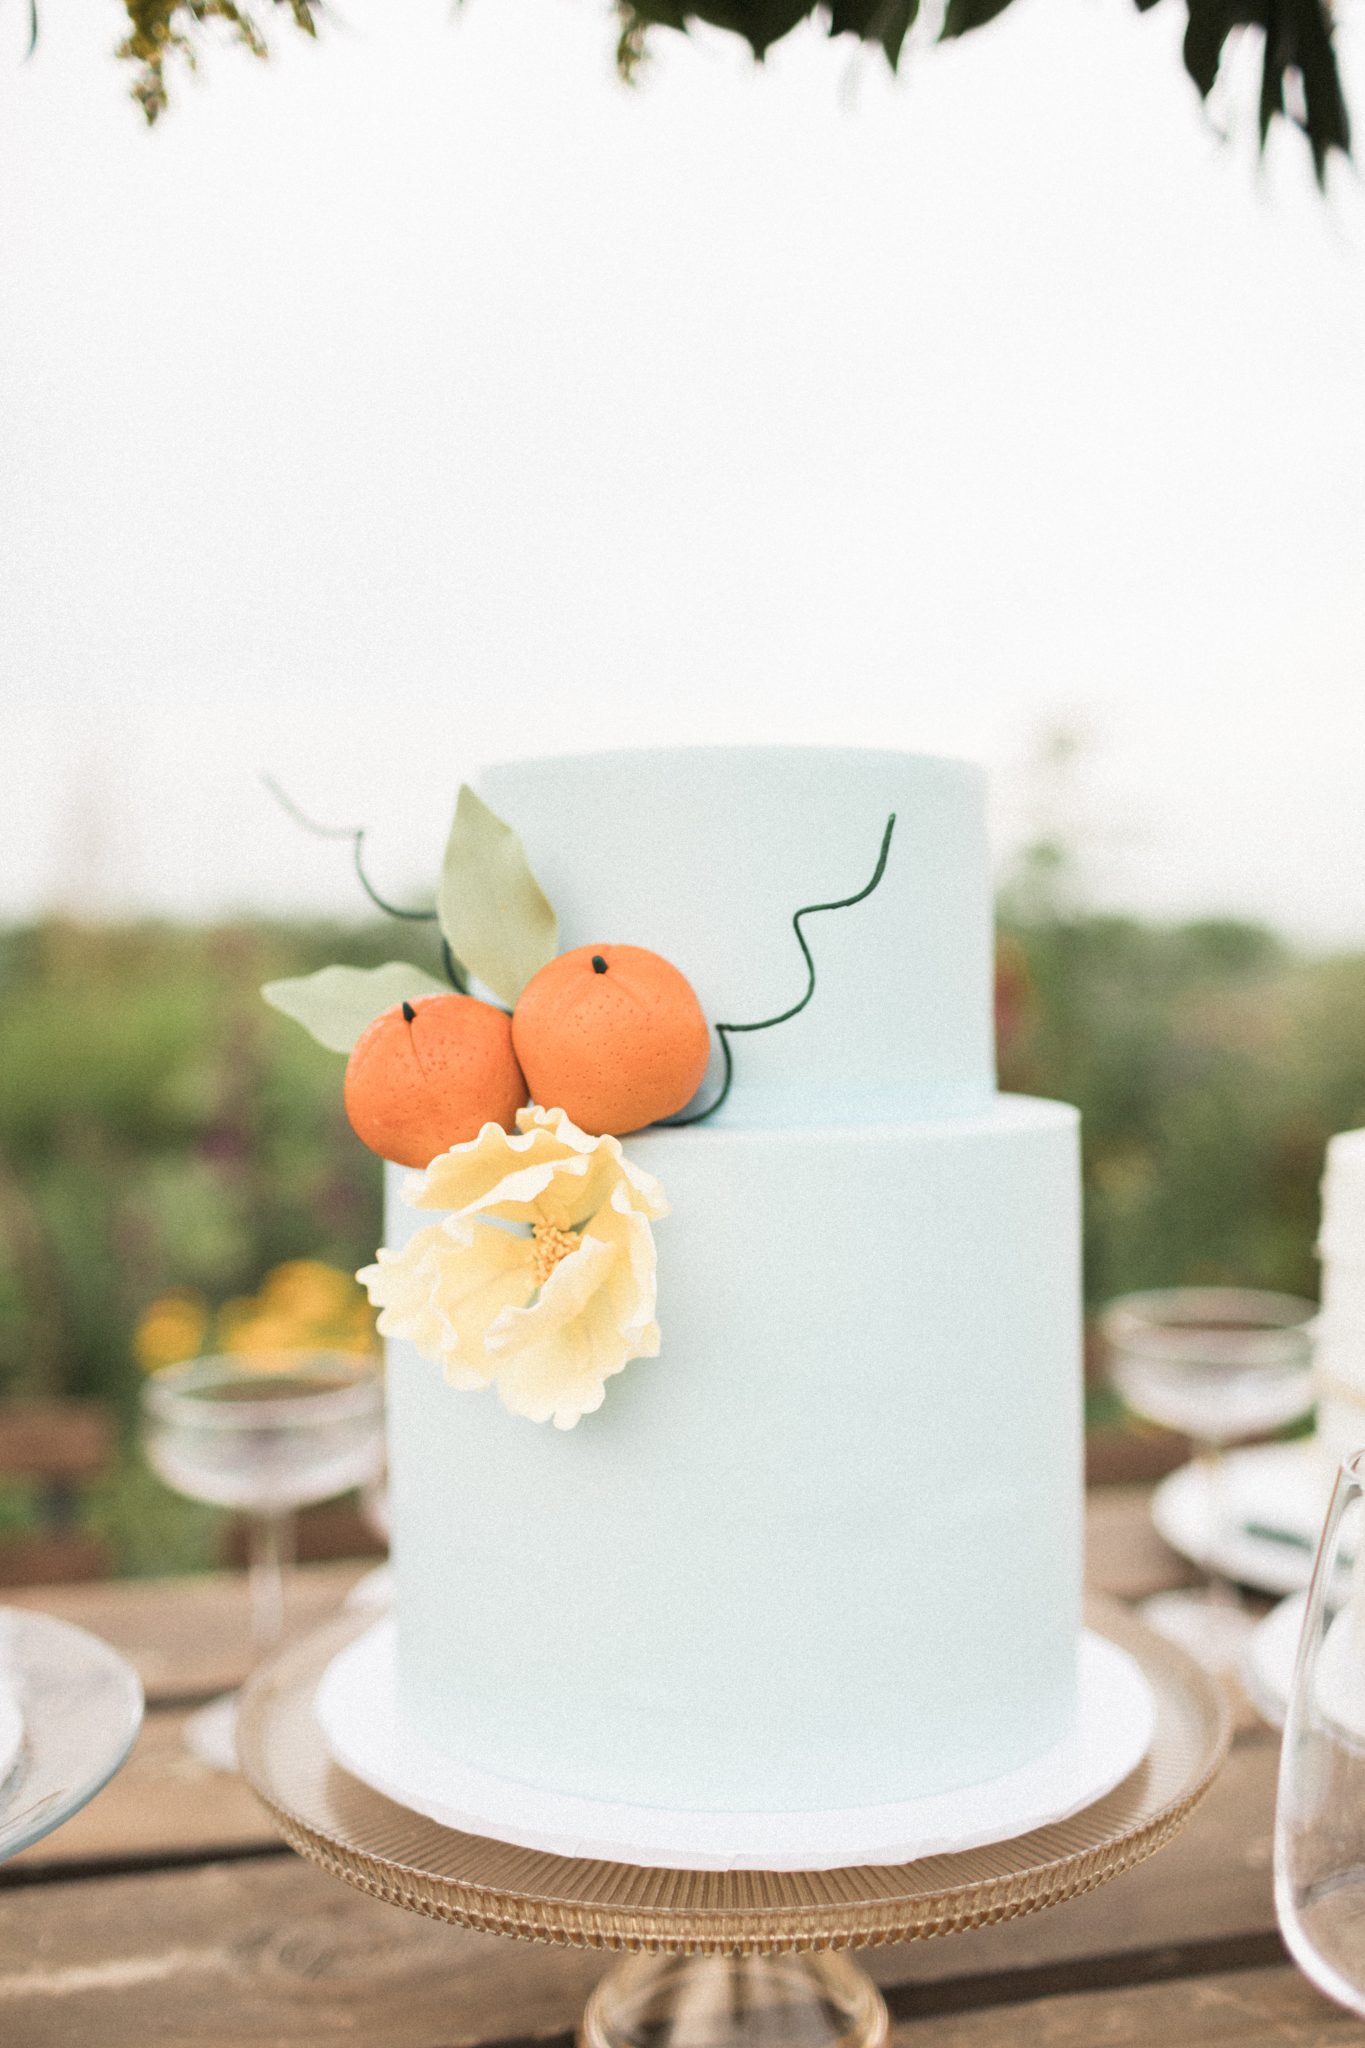 Robin blue wedding cake with tangerine and orange accents for this garden styled wedding